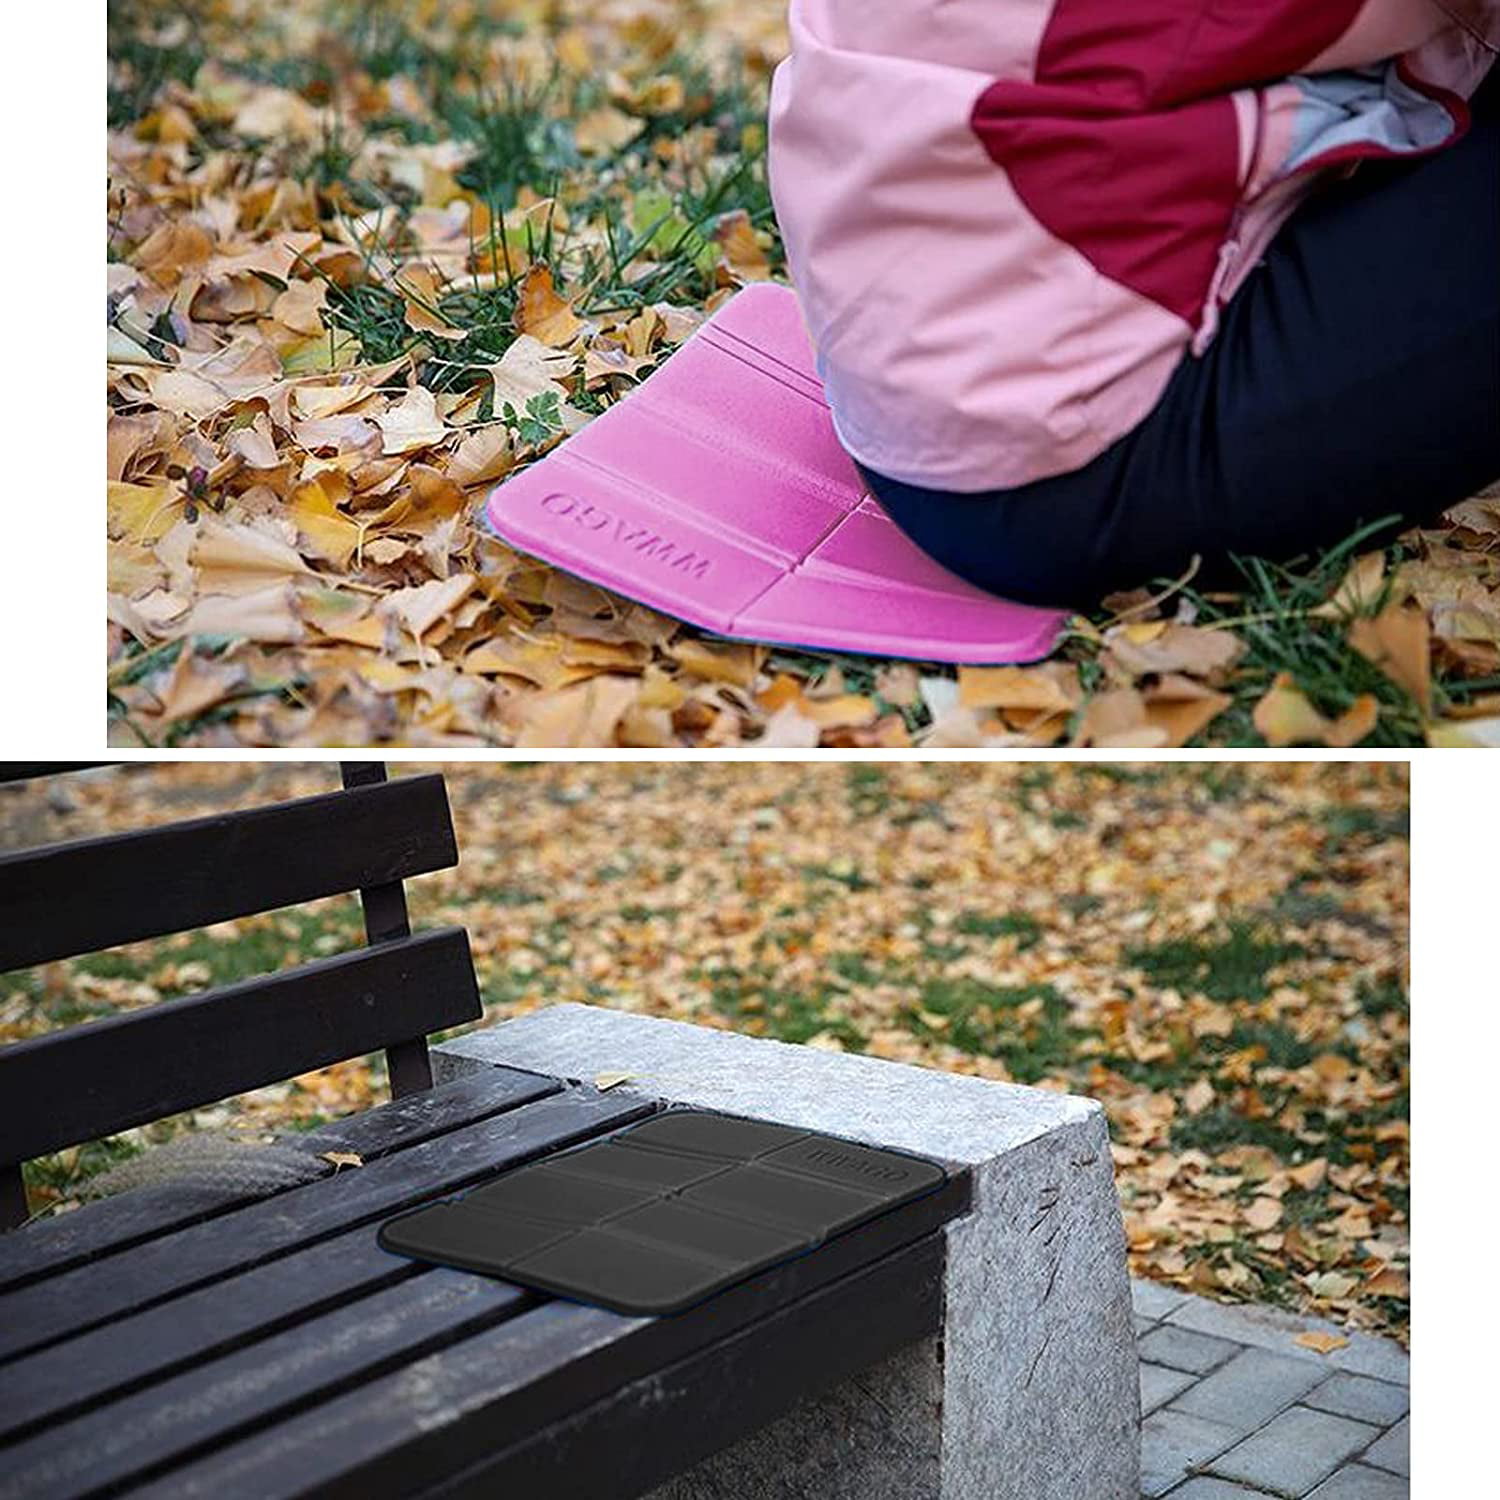 Outdoor Cushion Foldable Sit Mat for Hiking Tourism Camping Park Picnic 2PCS Folding Seat Cushions Waterproof Moisture-Proof Pad Insulated Foam Sit Mat 